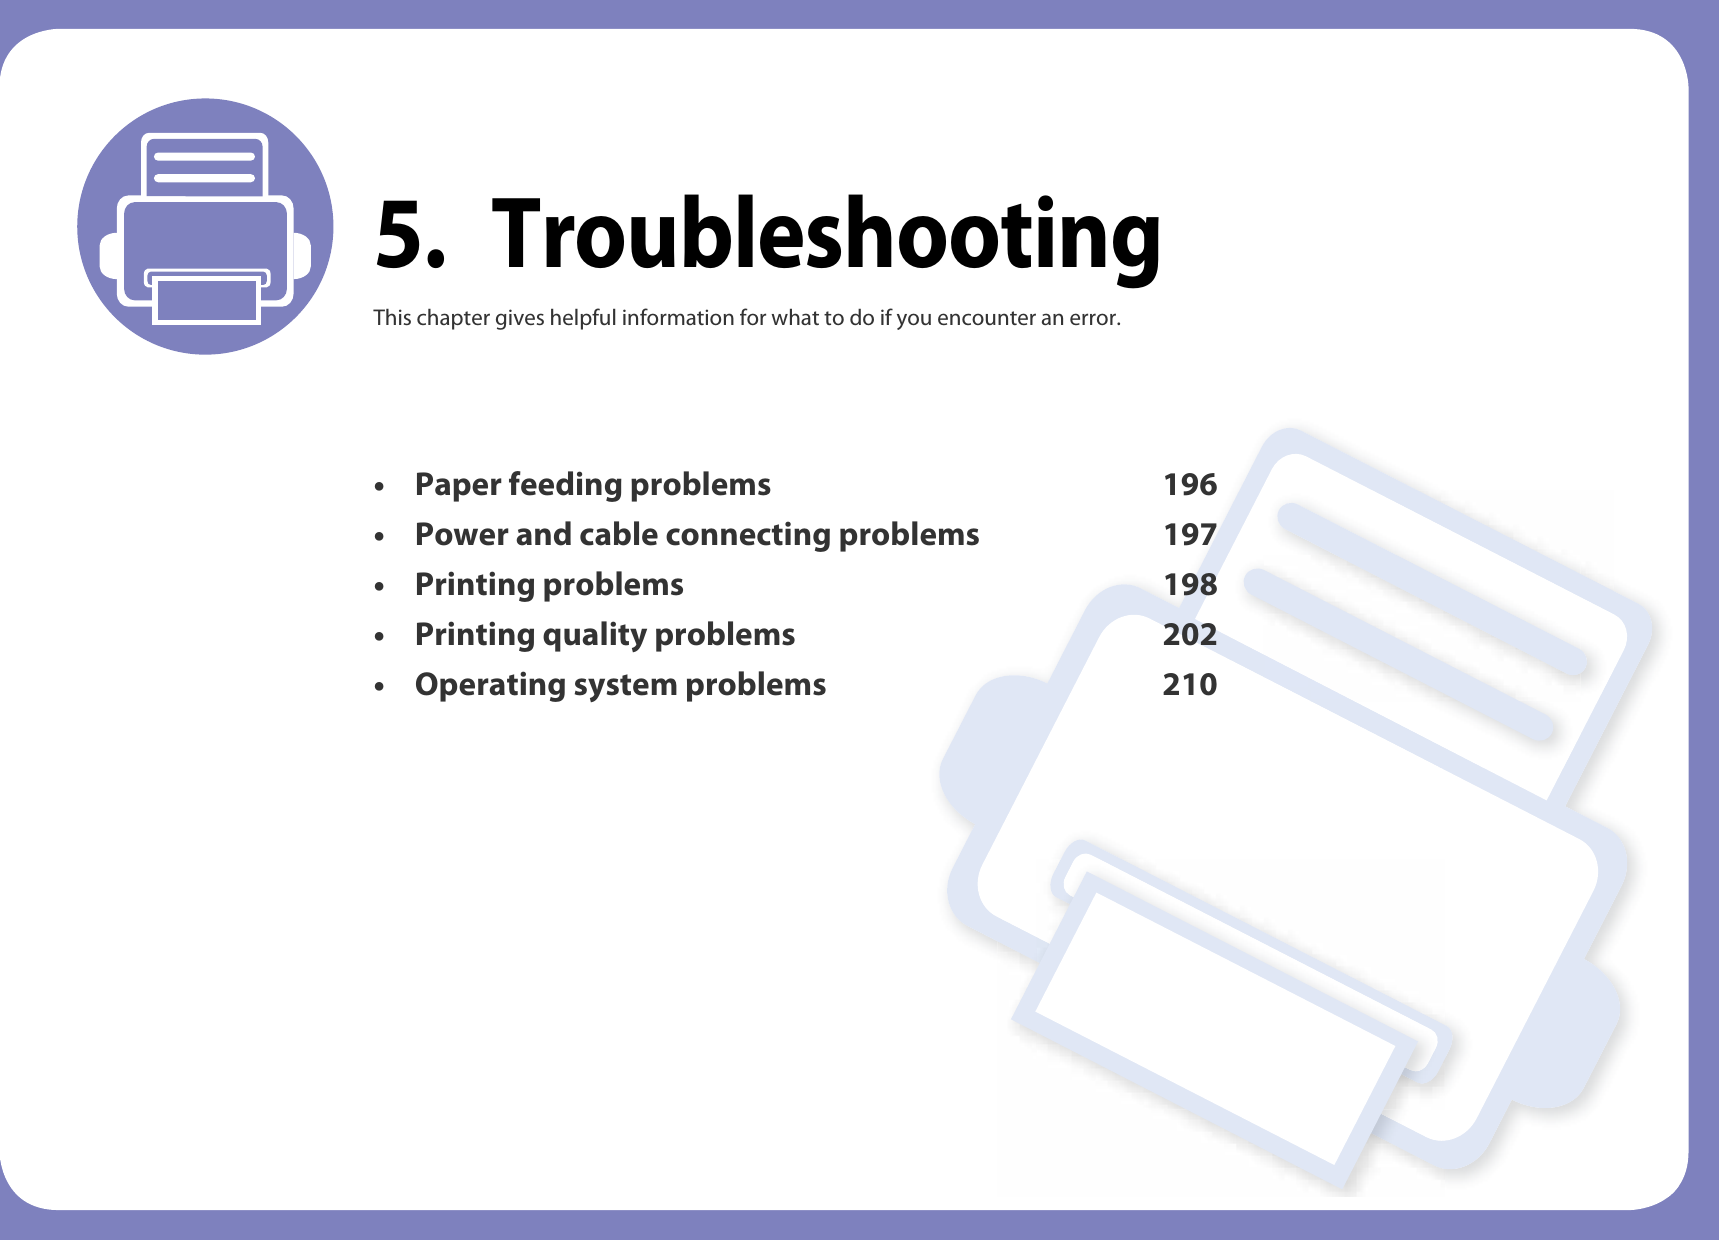 5. TroubleshootingThis chapter gives helpful information for what to do if you encounter an error.• Paper feeding problems 196• Power and cable connecting problems 197• Printing problems 198• Printing quality problems 202• Operating system problems 210